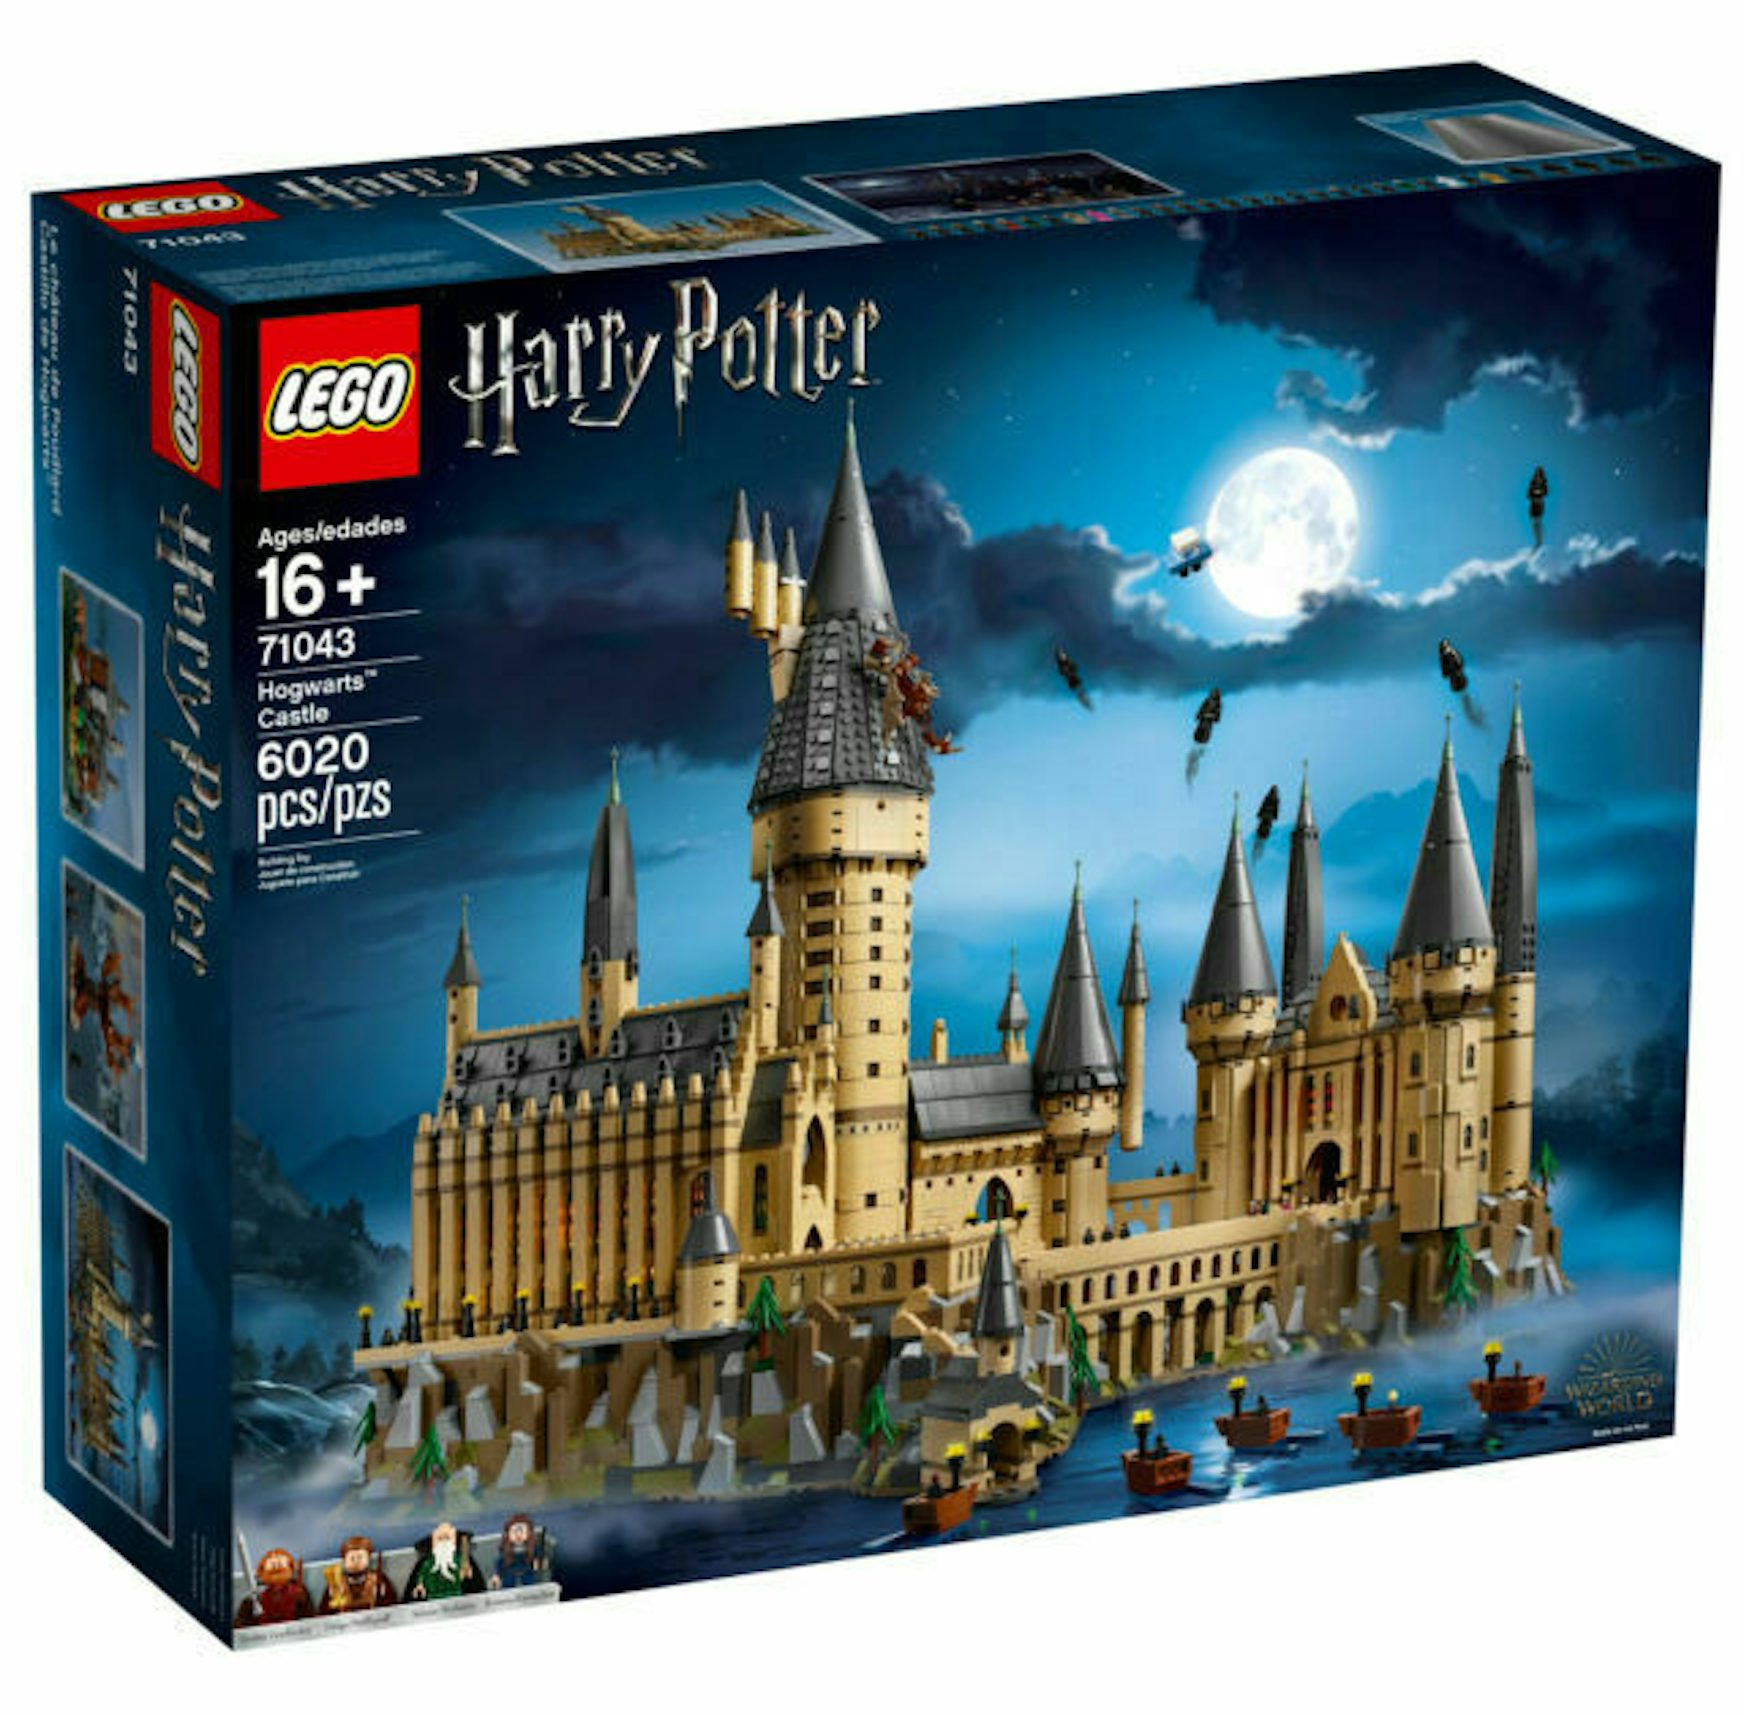 IN PHOTOS: New Harry Potter Lego sets feature scenes from 'Chamber